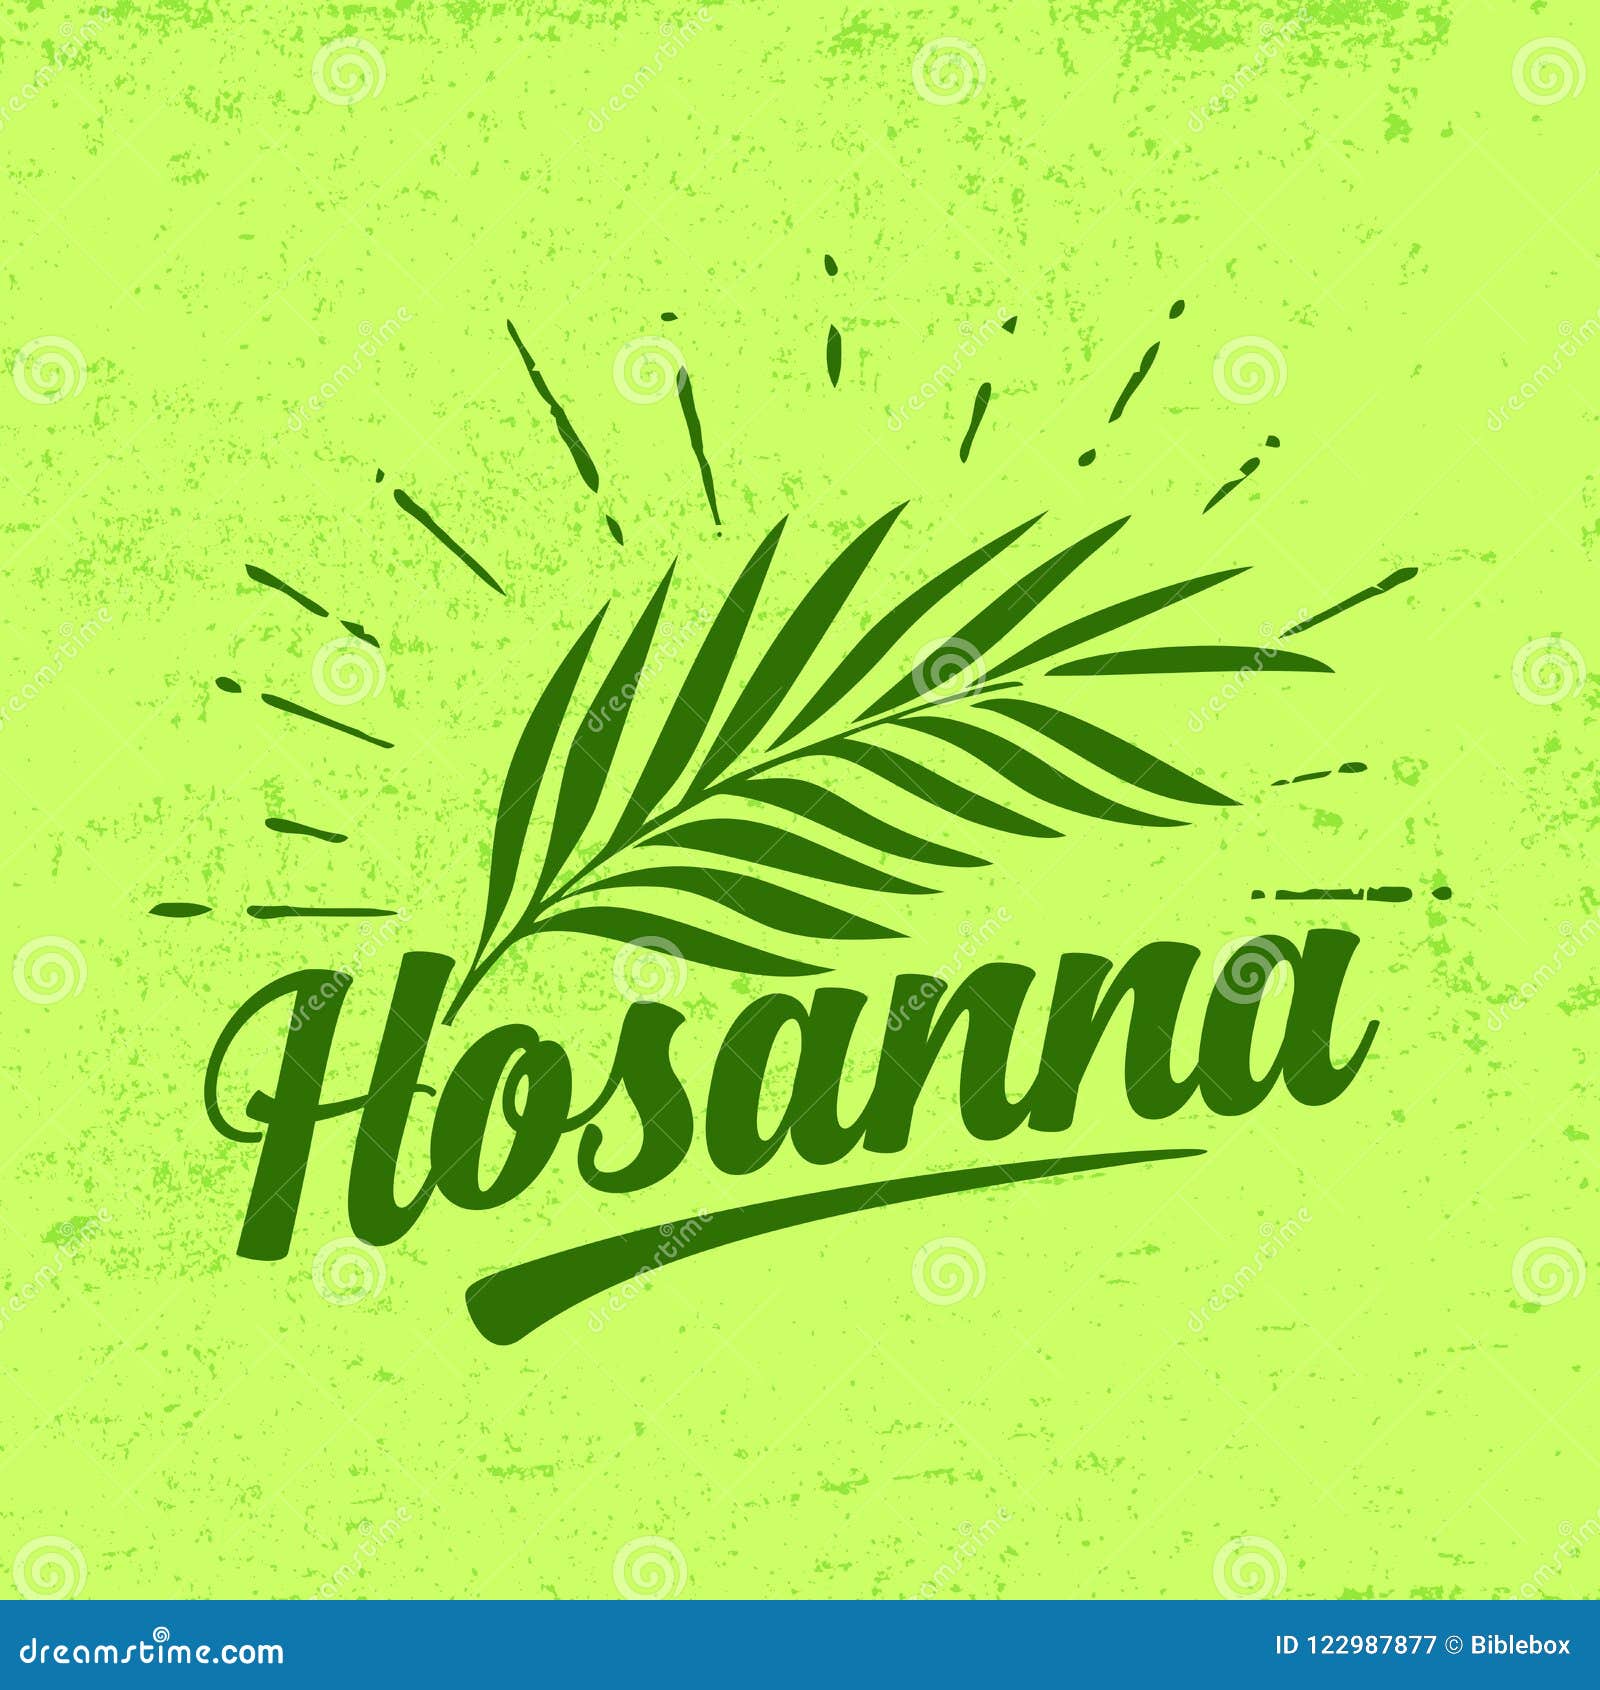 Hosanna To The King Scripture Page Wall Decal